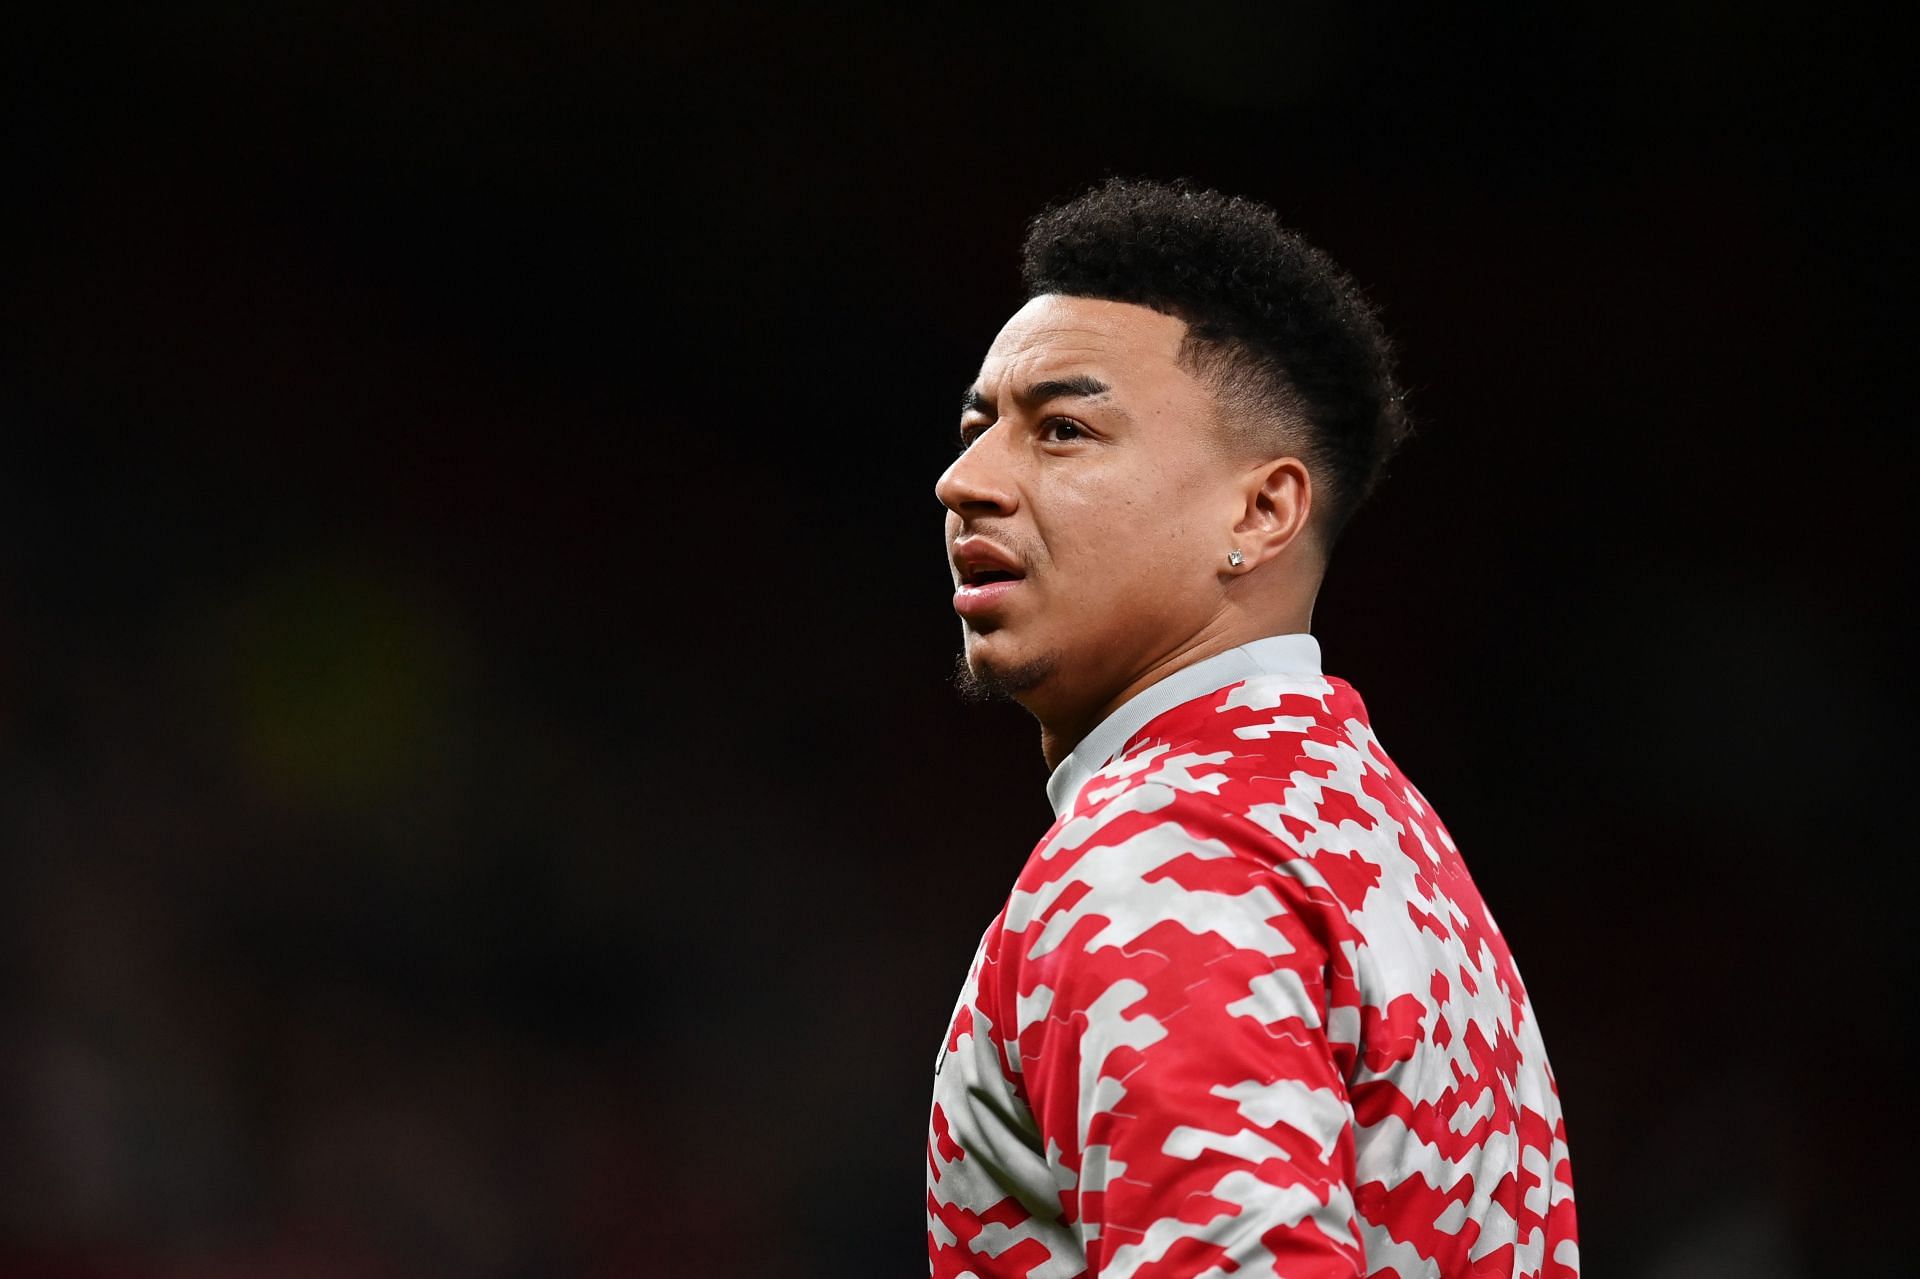 West Ham United are ready to test Manchester United&rsquo;s resolve by submitting a second bid for Lingard.